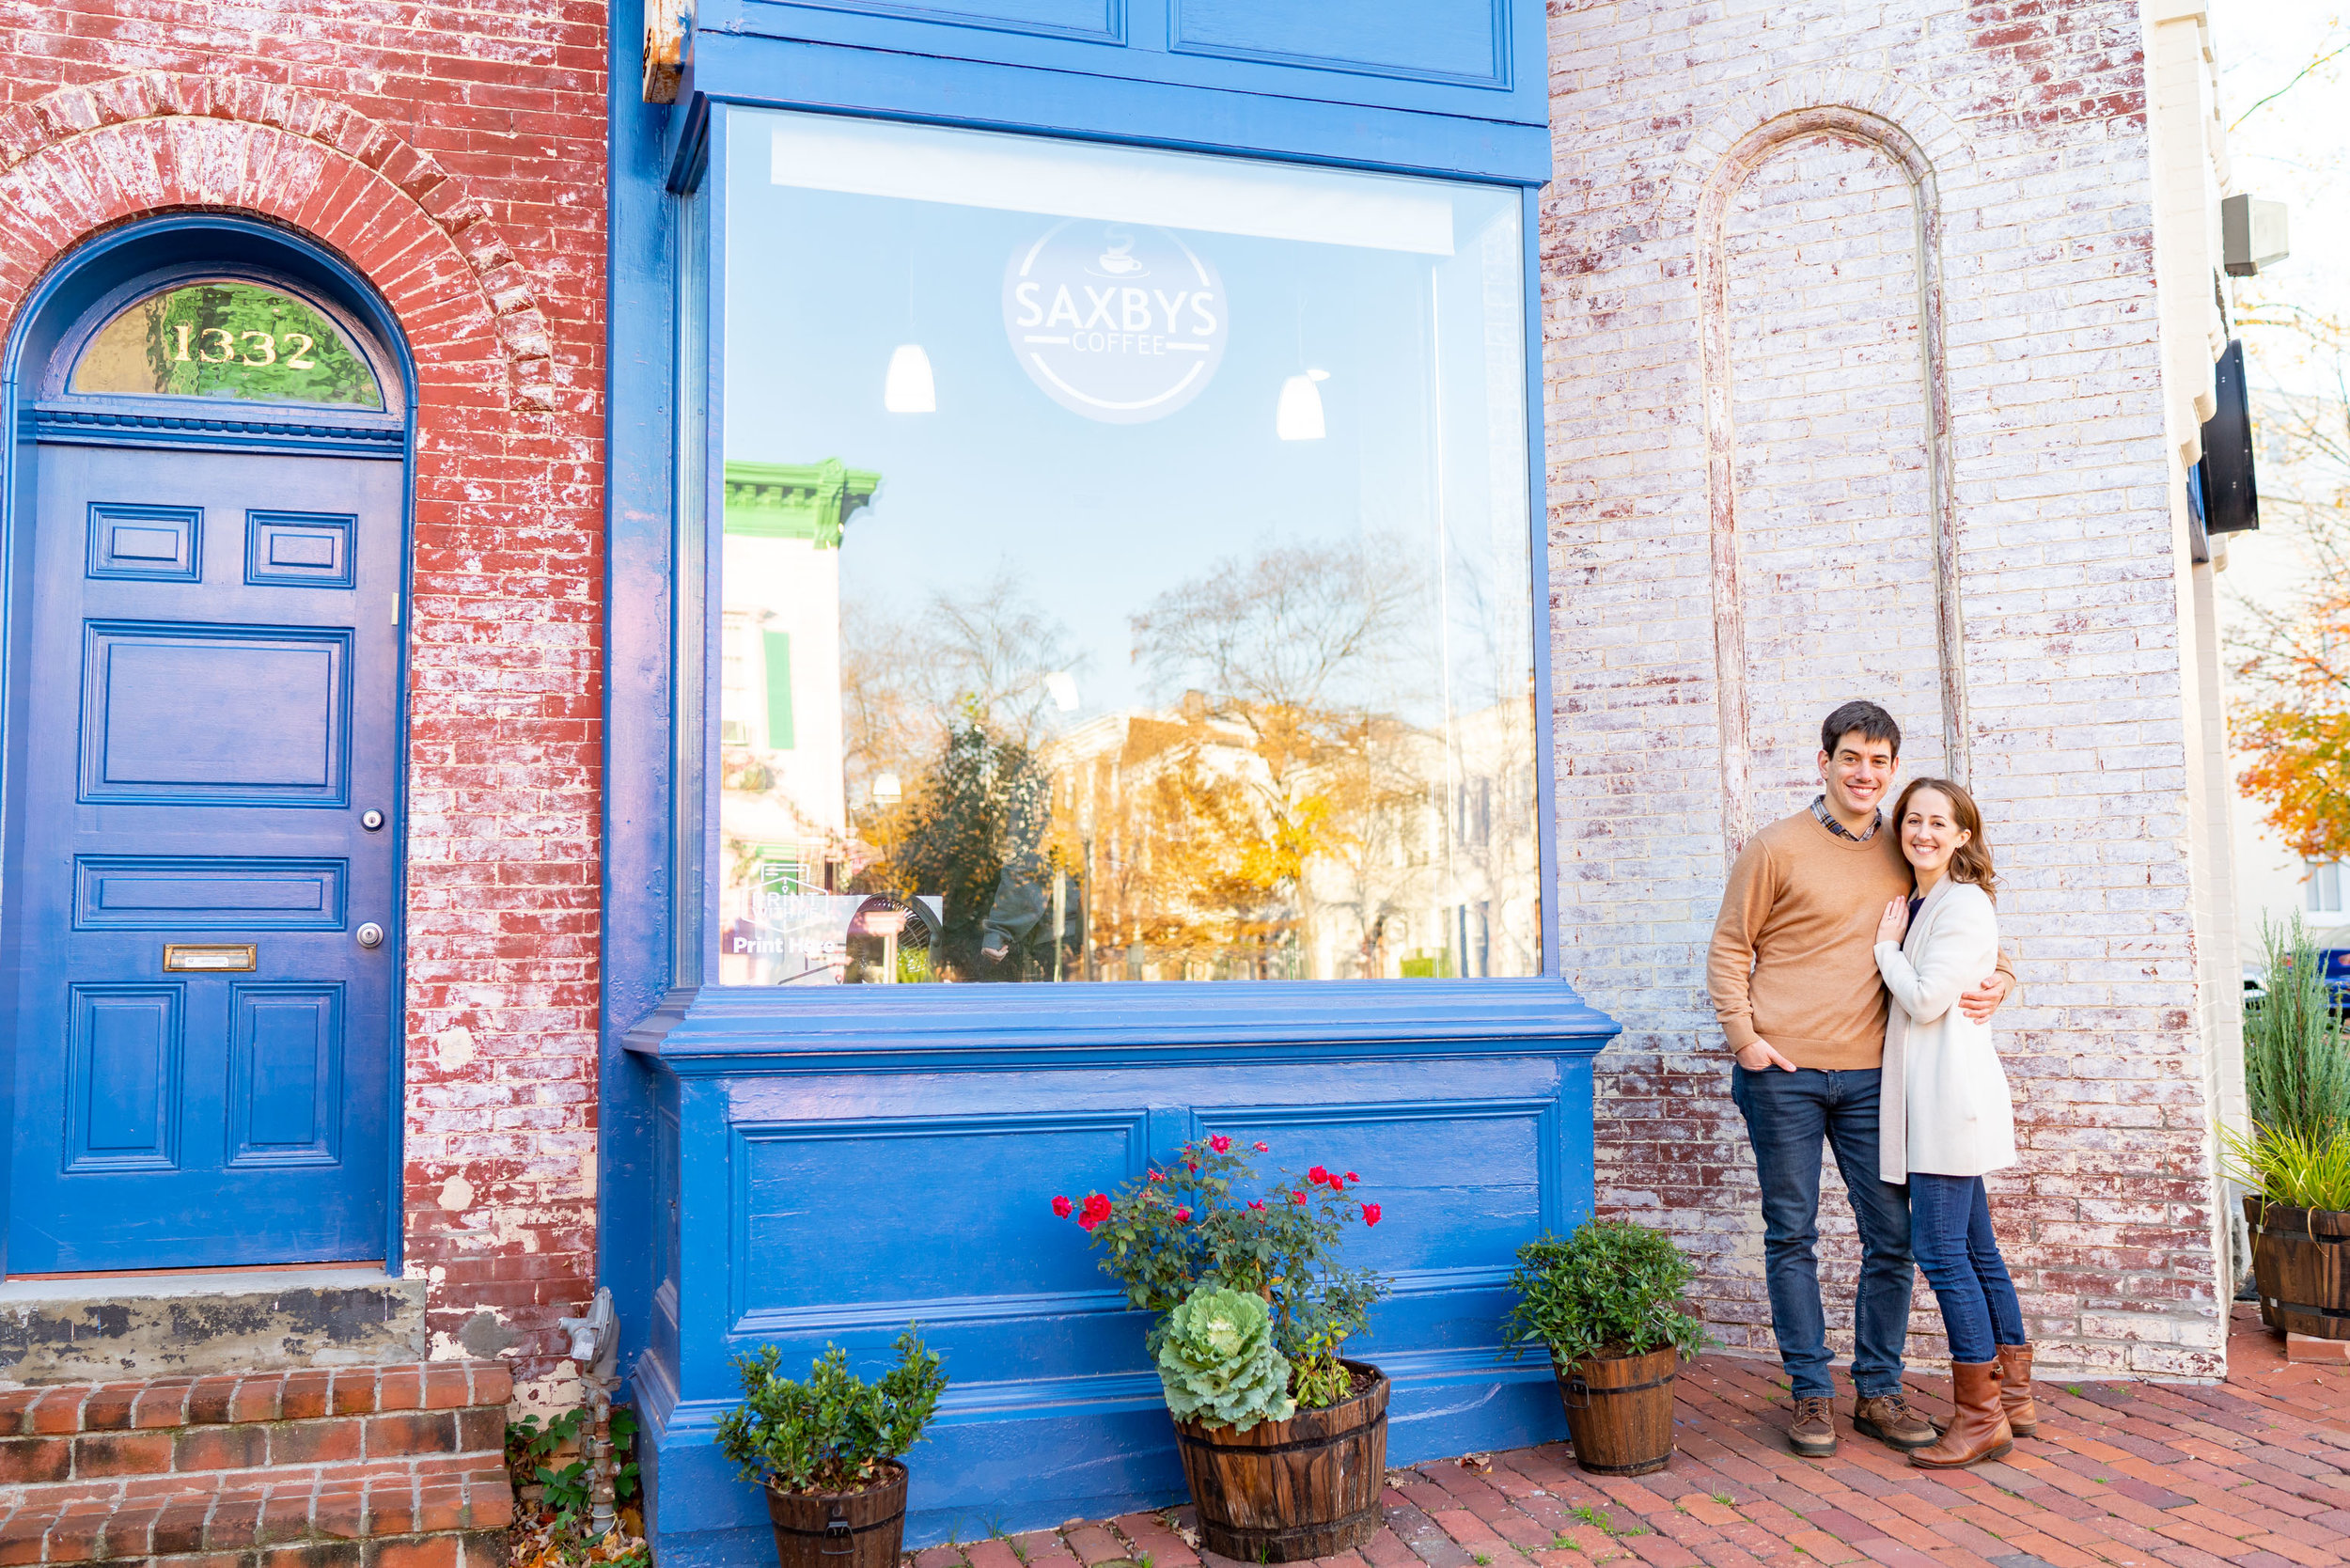 Bride and groom standing in front of blue front Saxby's coffee shop for engagement photo